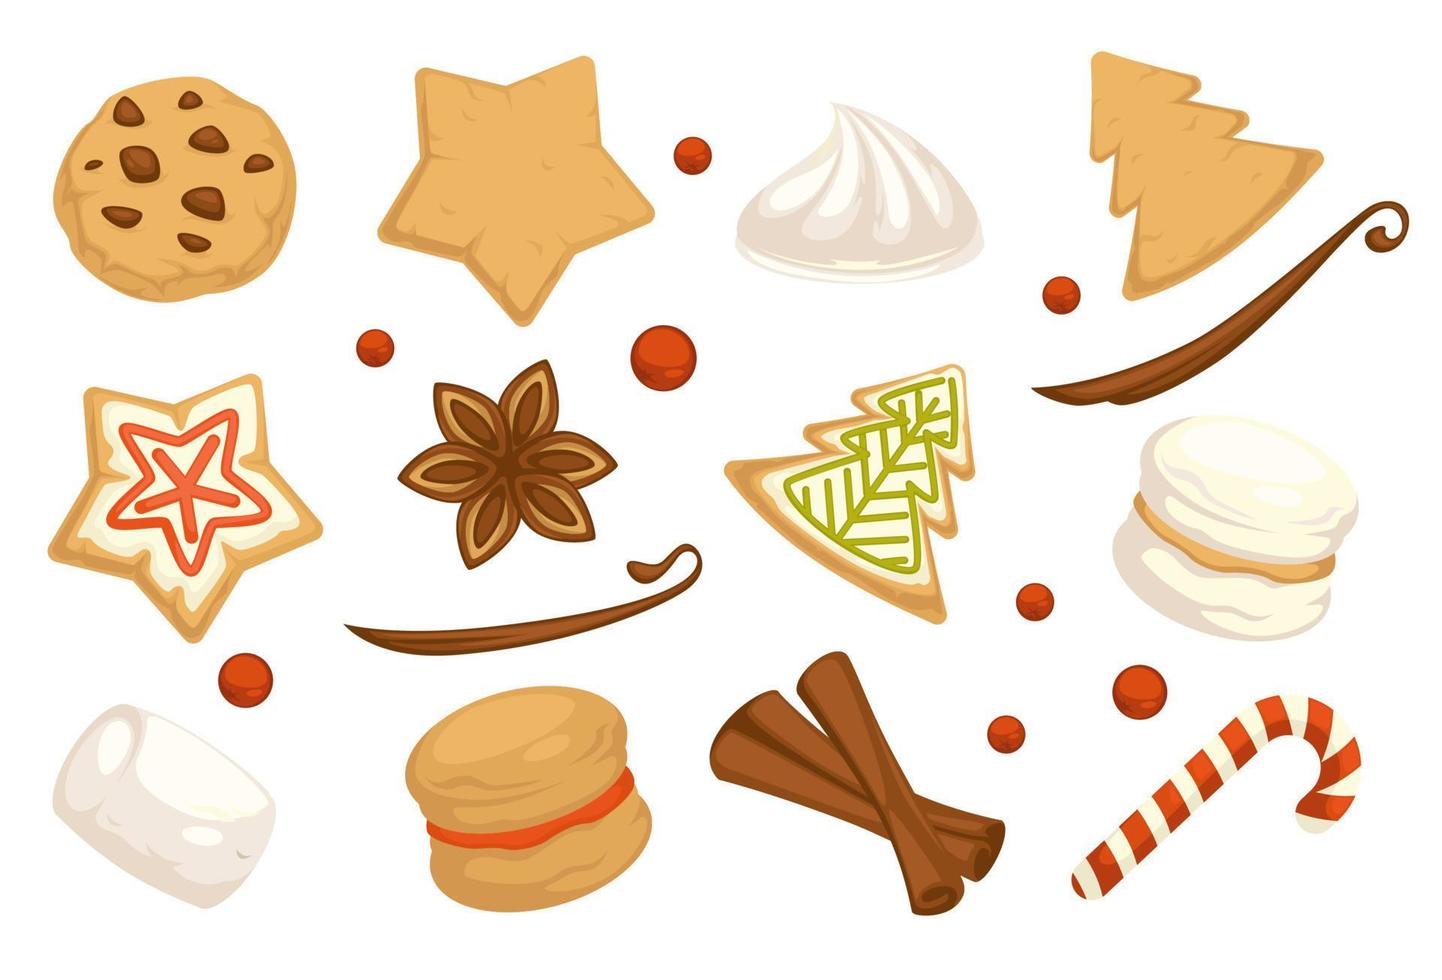 Xmas sweets and traditional gingerbread cookies vector